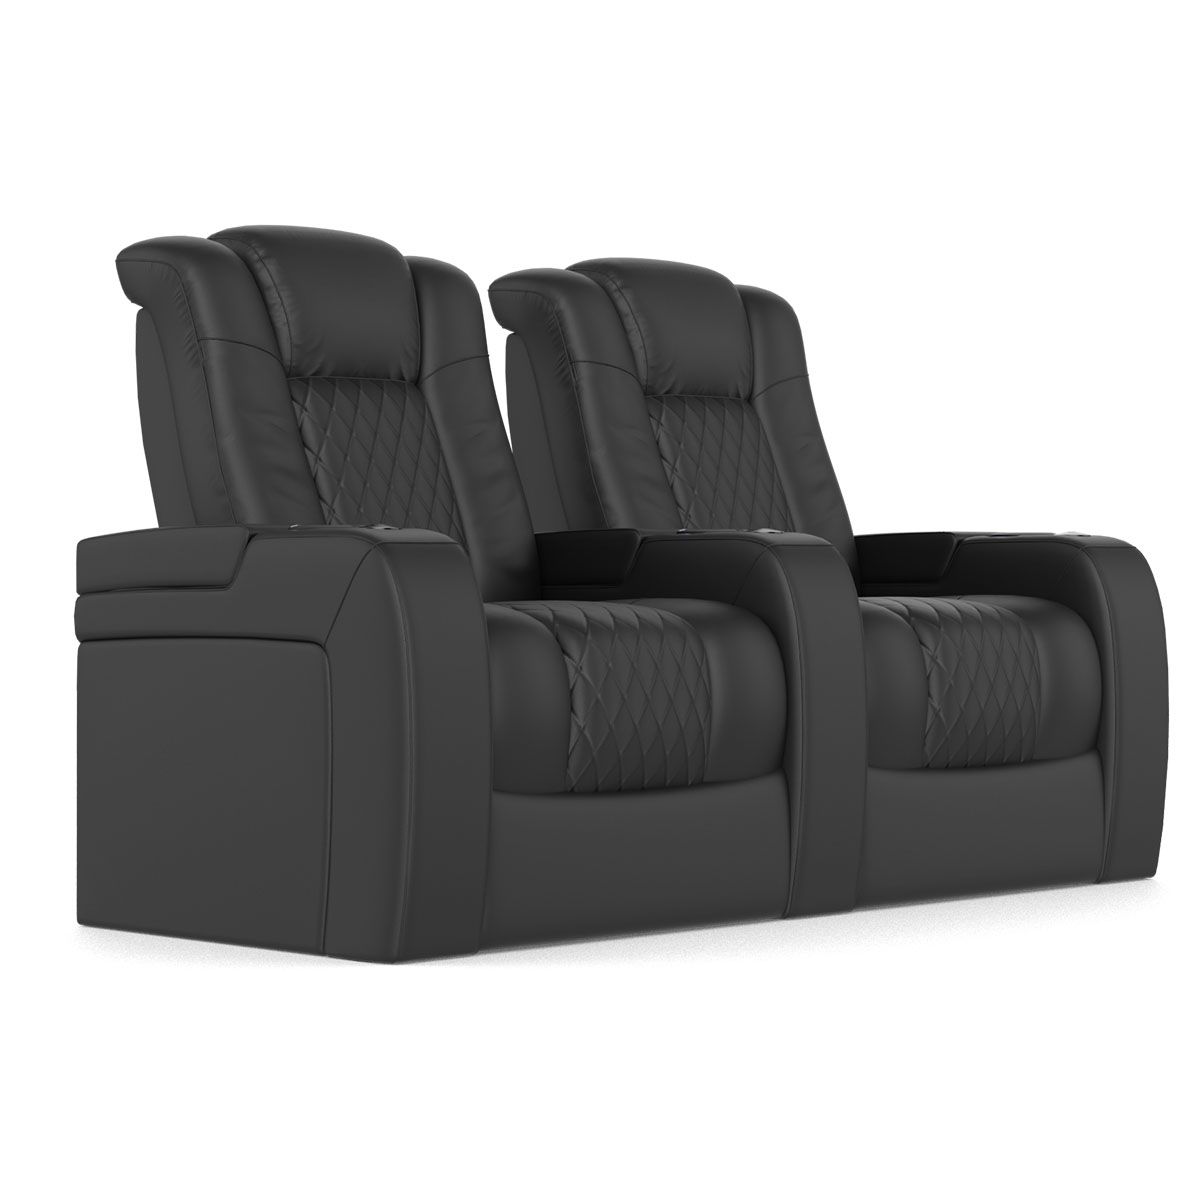 Audio Advice Revelation Home Theater Seating - angled front view of 2 chair row